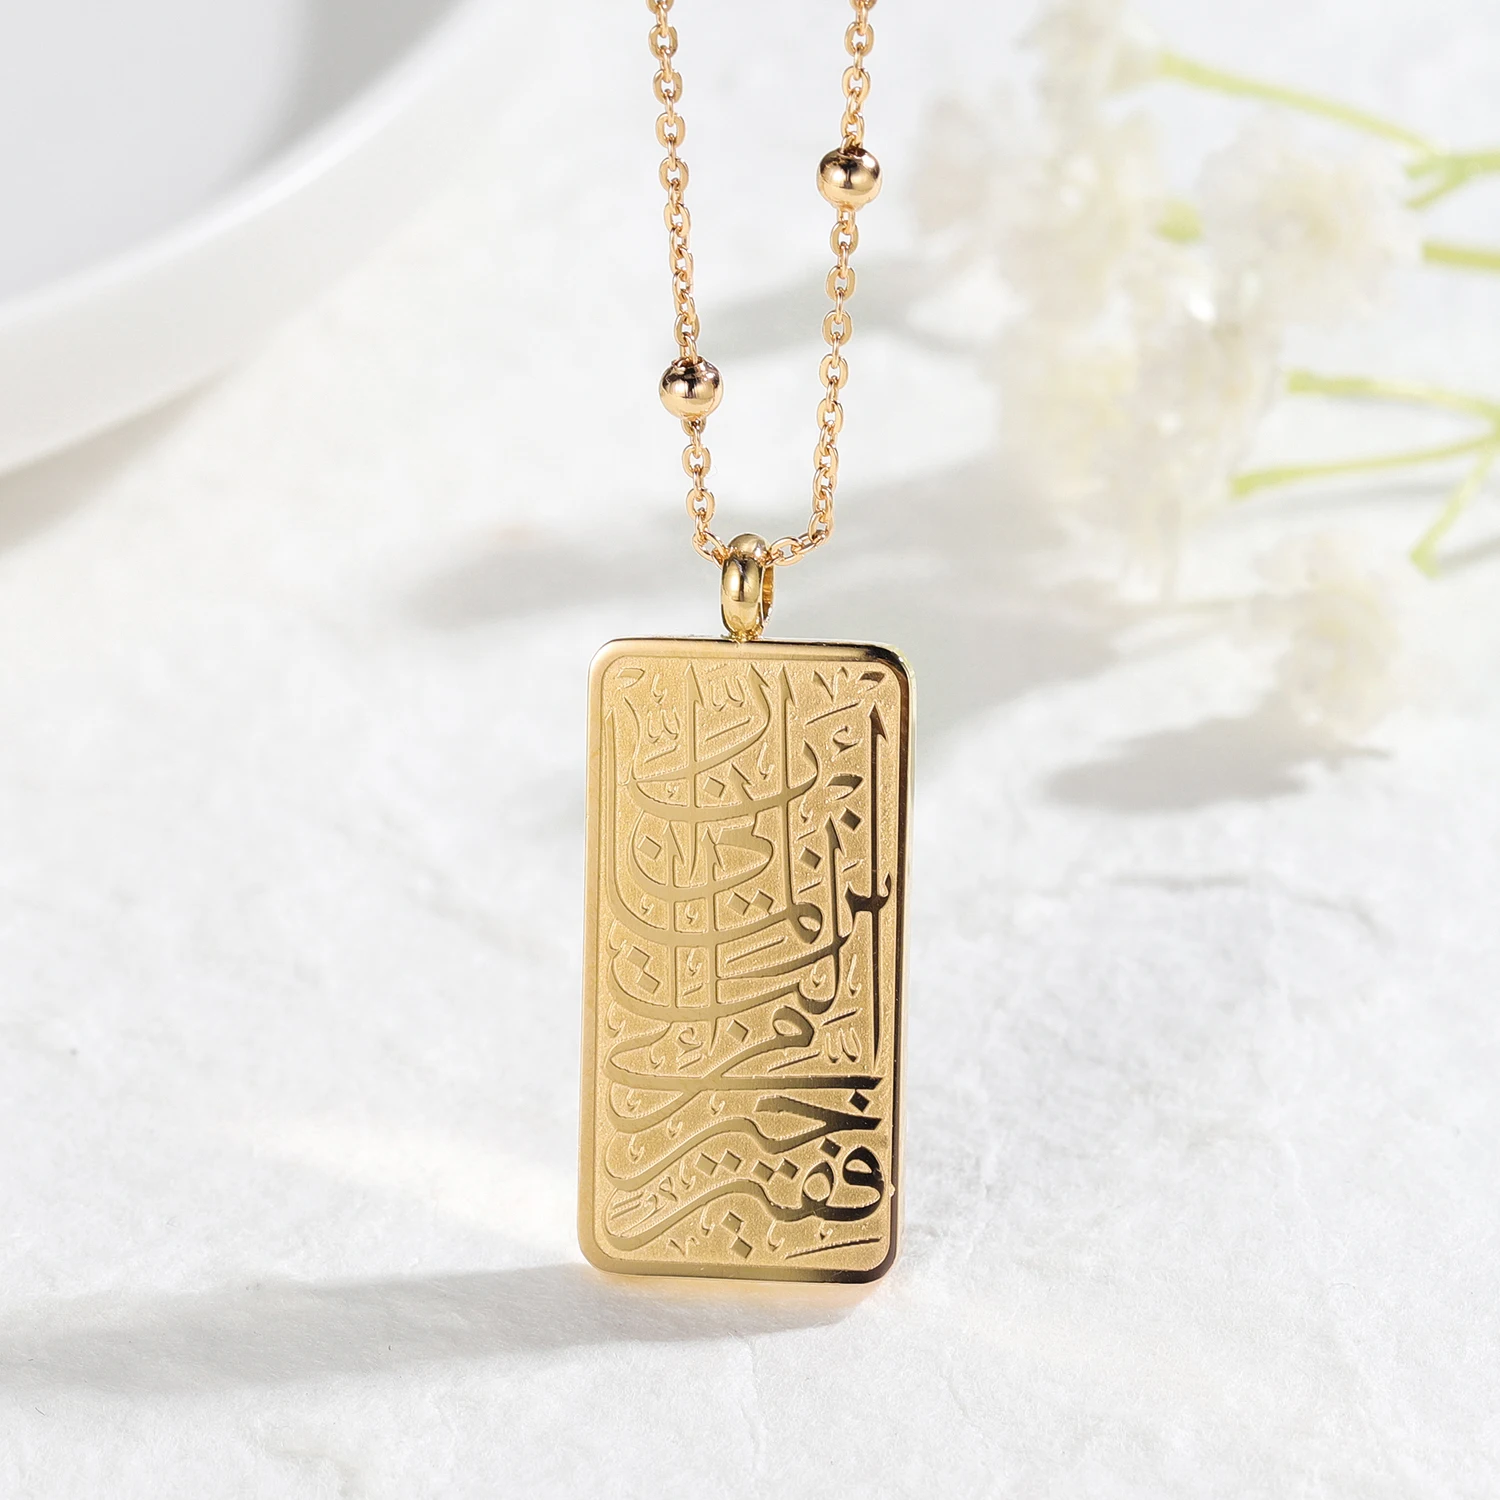 Custome Suratul Qasas Necklace Gold Stainless Steel Chain Square  for Women Pendant Islamic Calligraphy Arabic Necklace Gifts